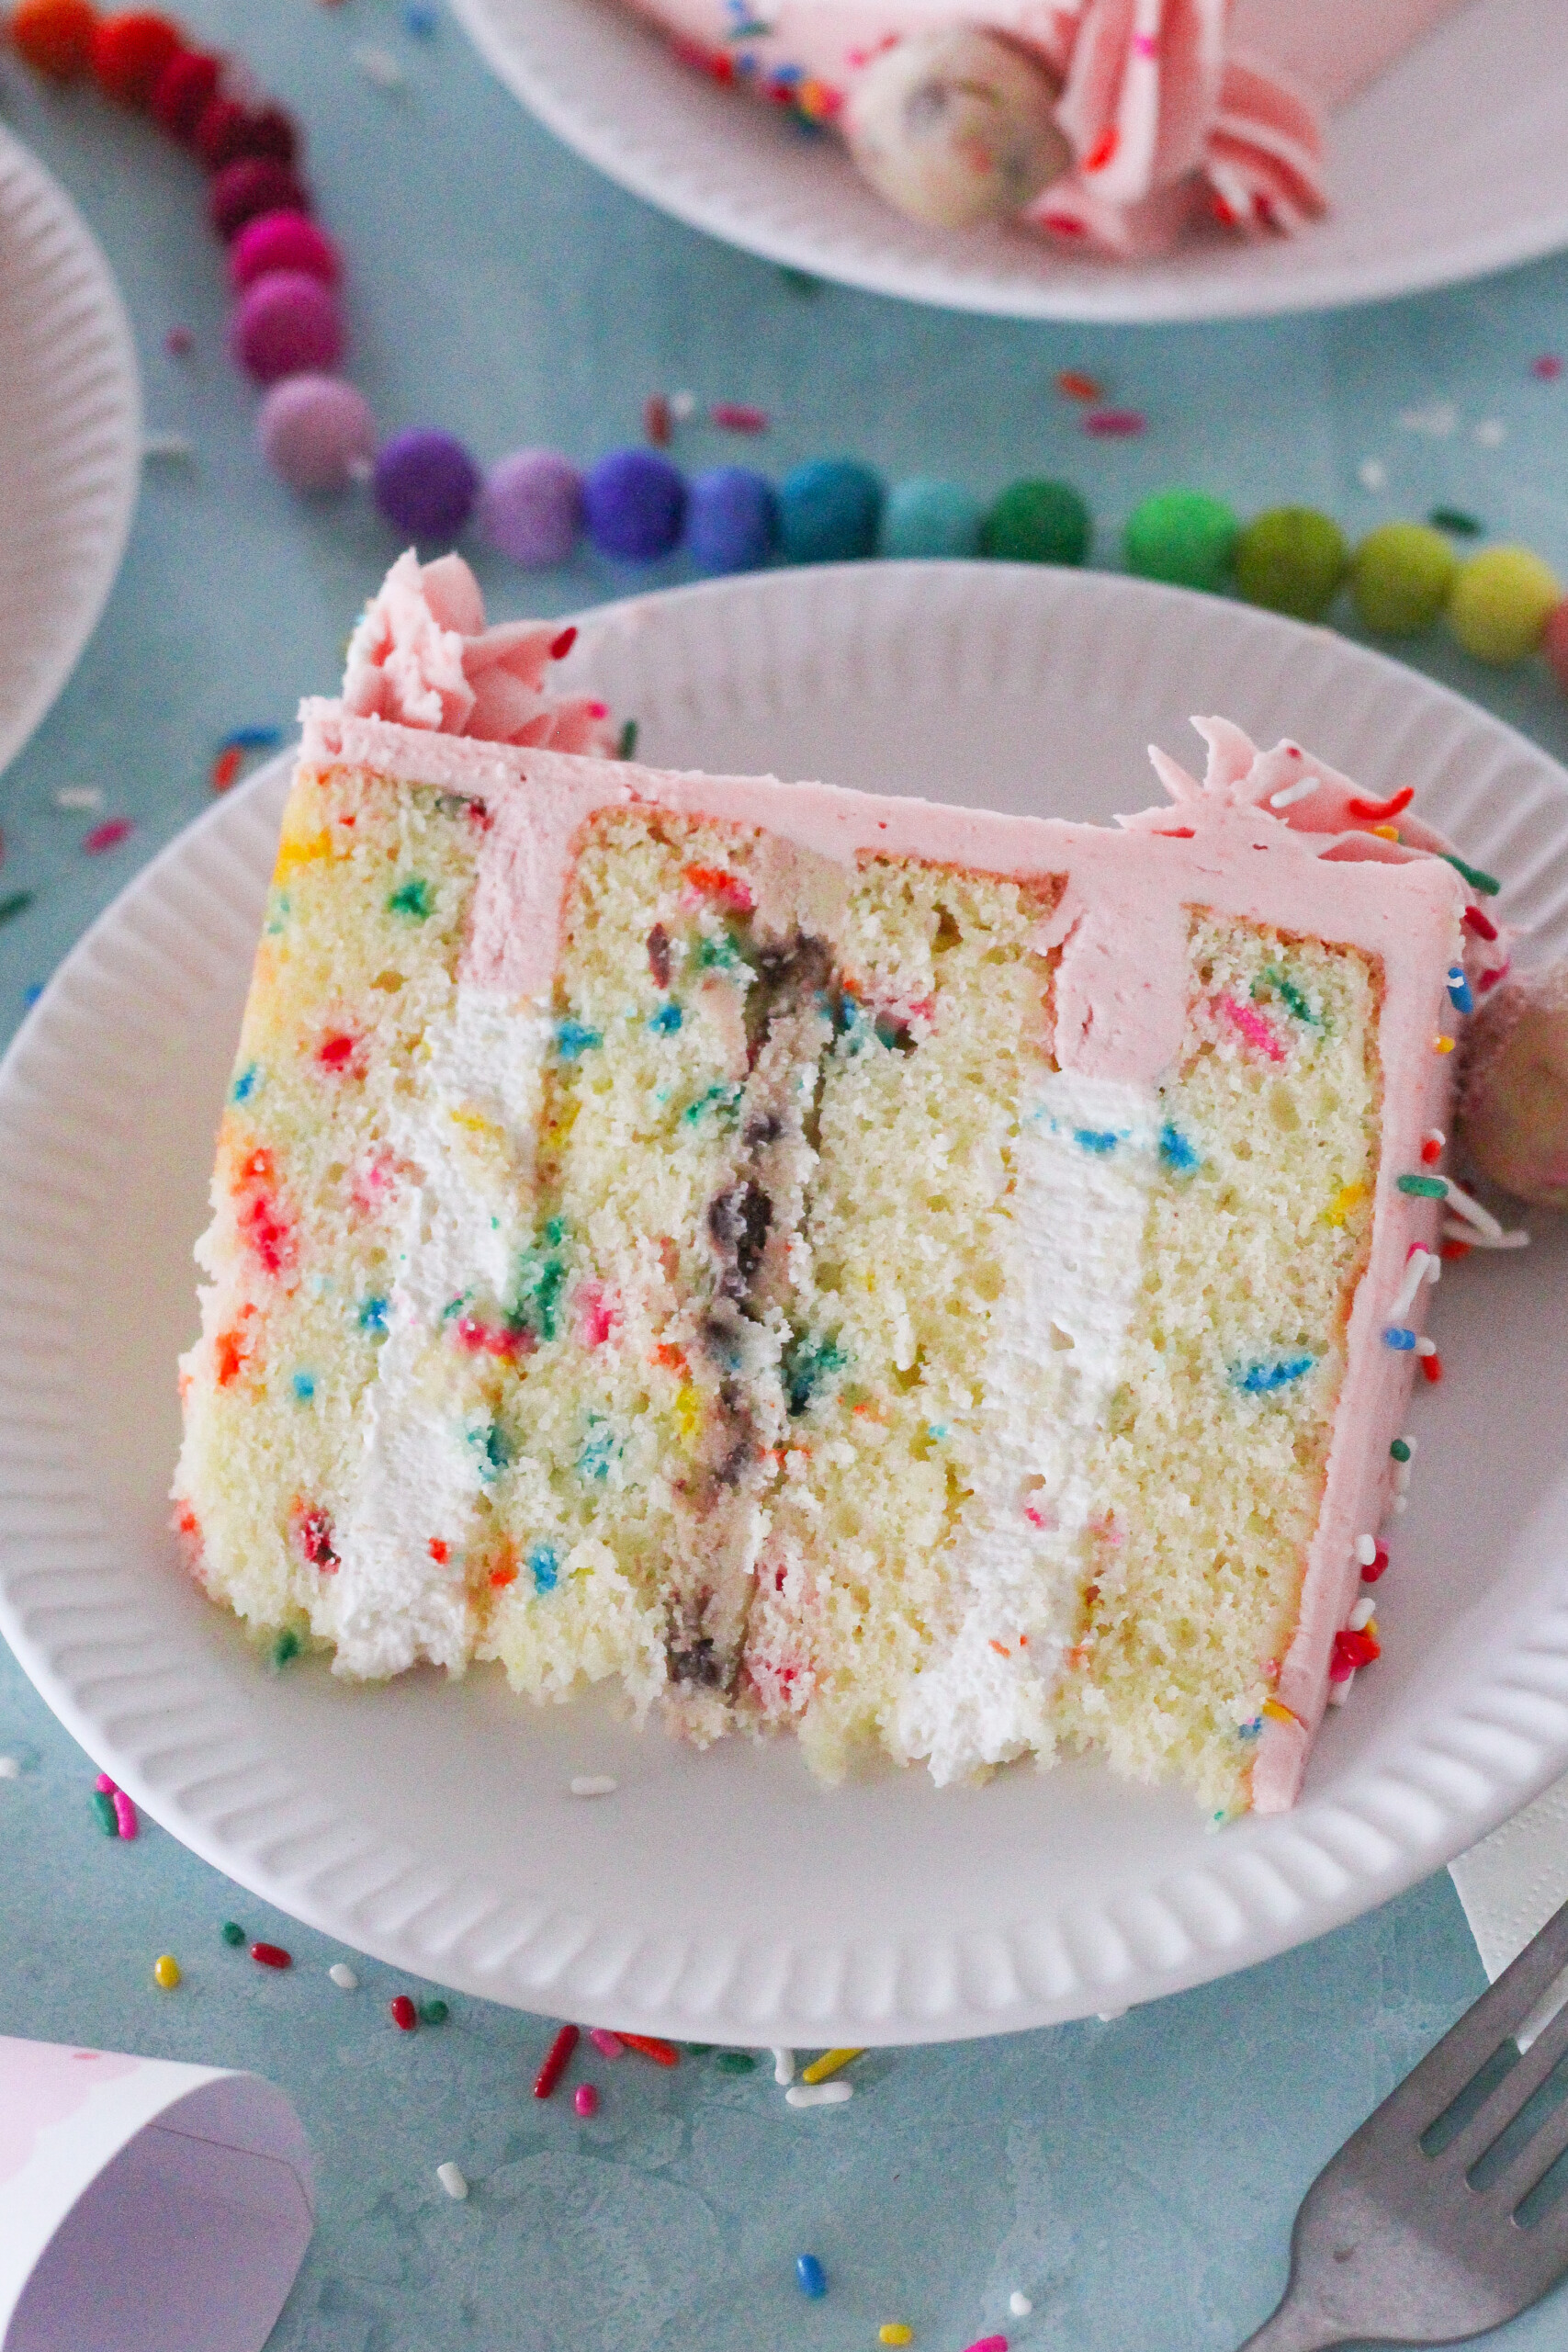 A slice of confetti cake on a plate with party decorations.